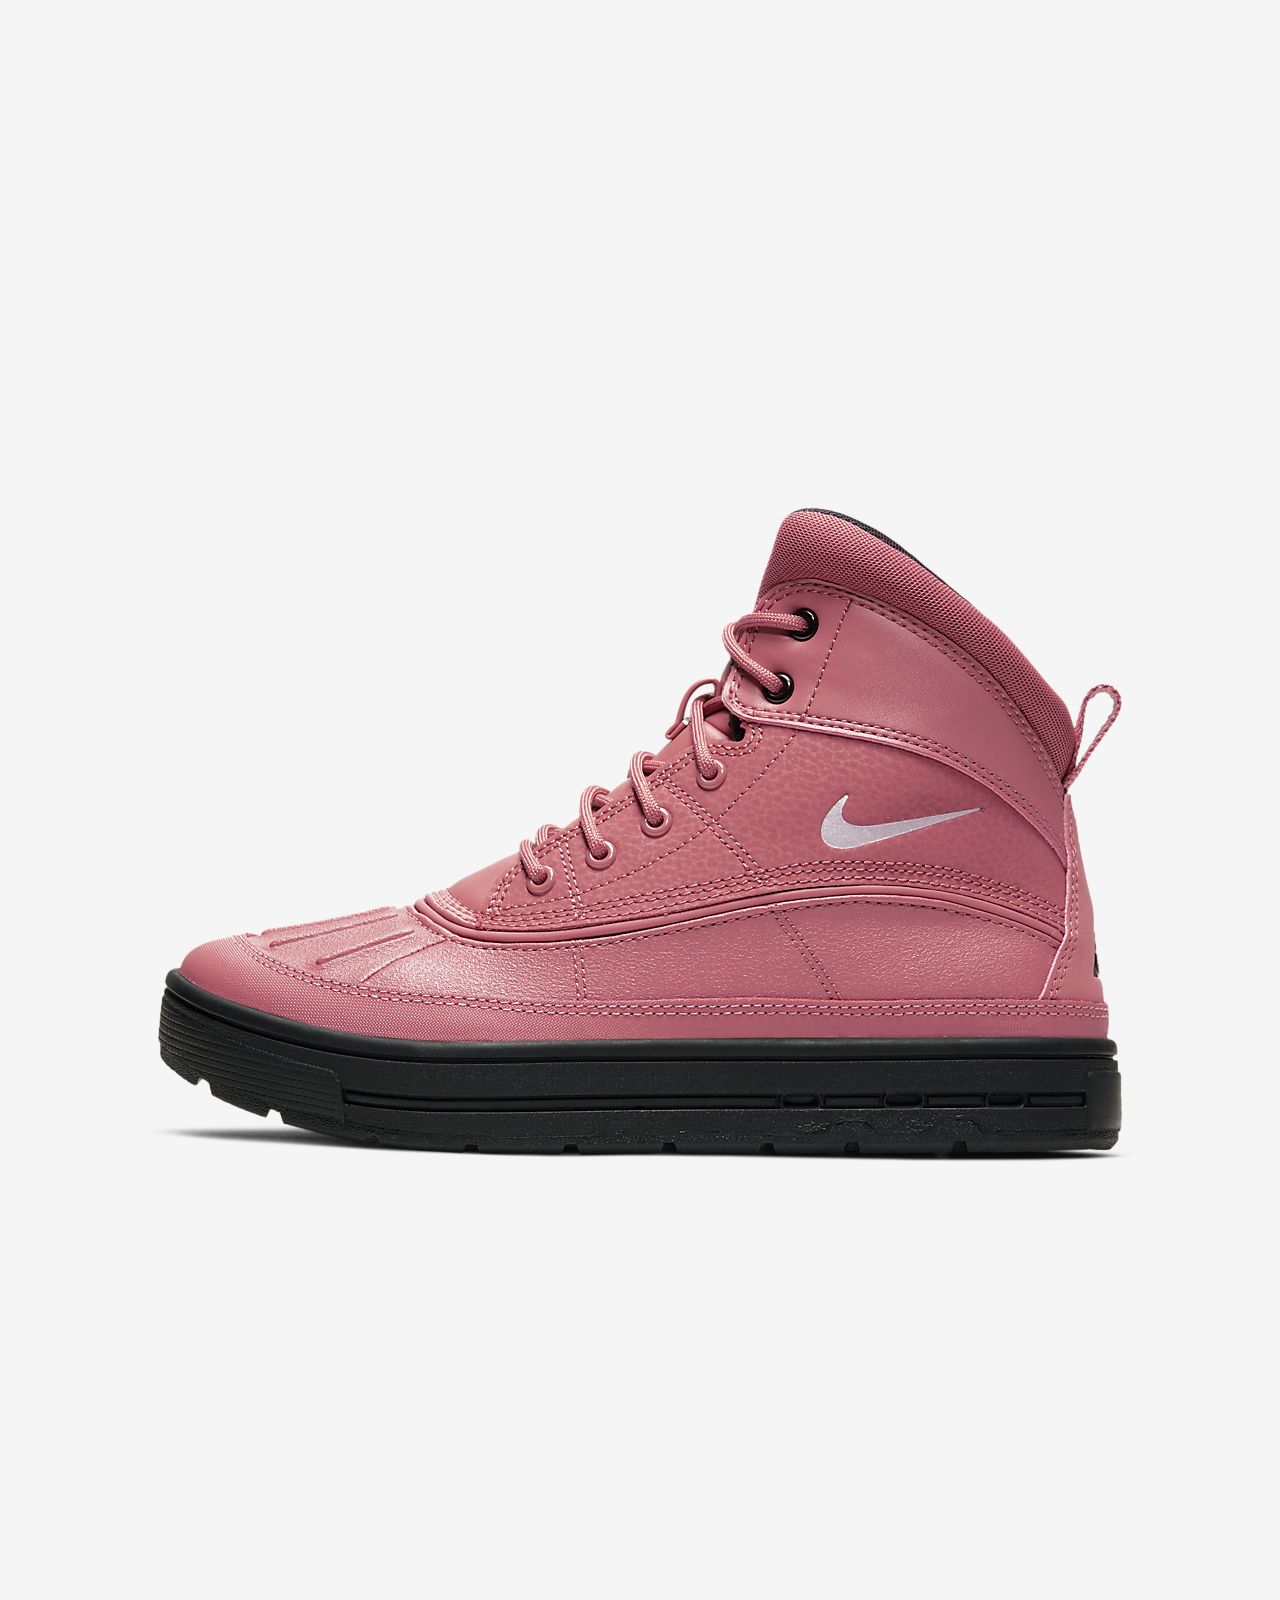 nike acg boots for boys Online Shopping 